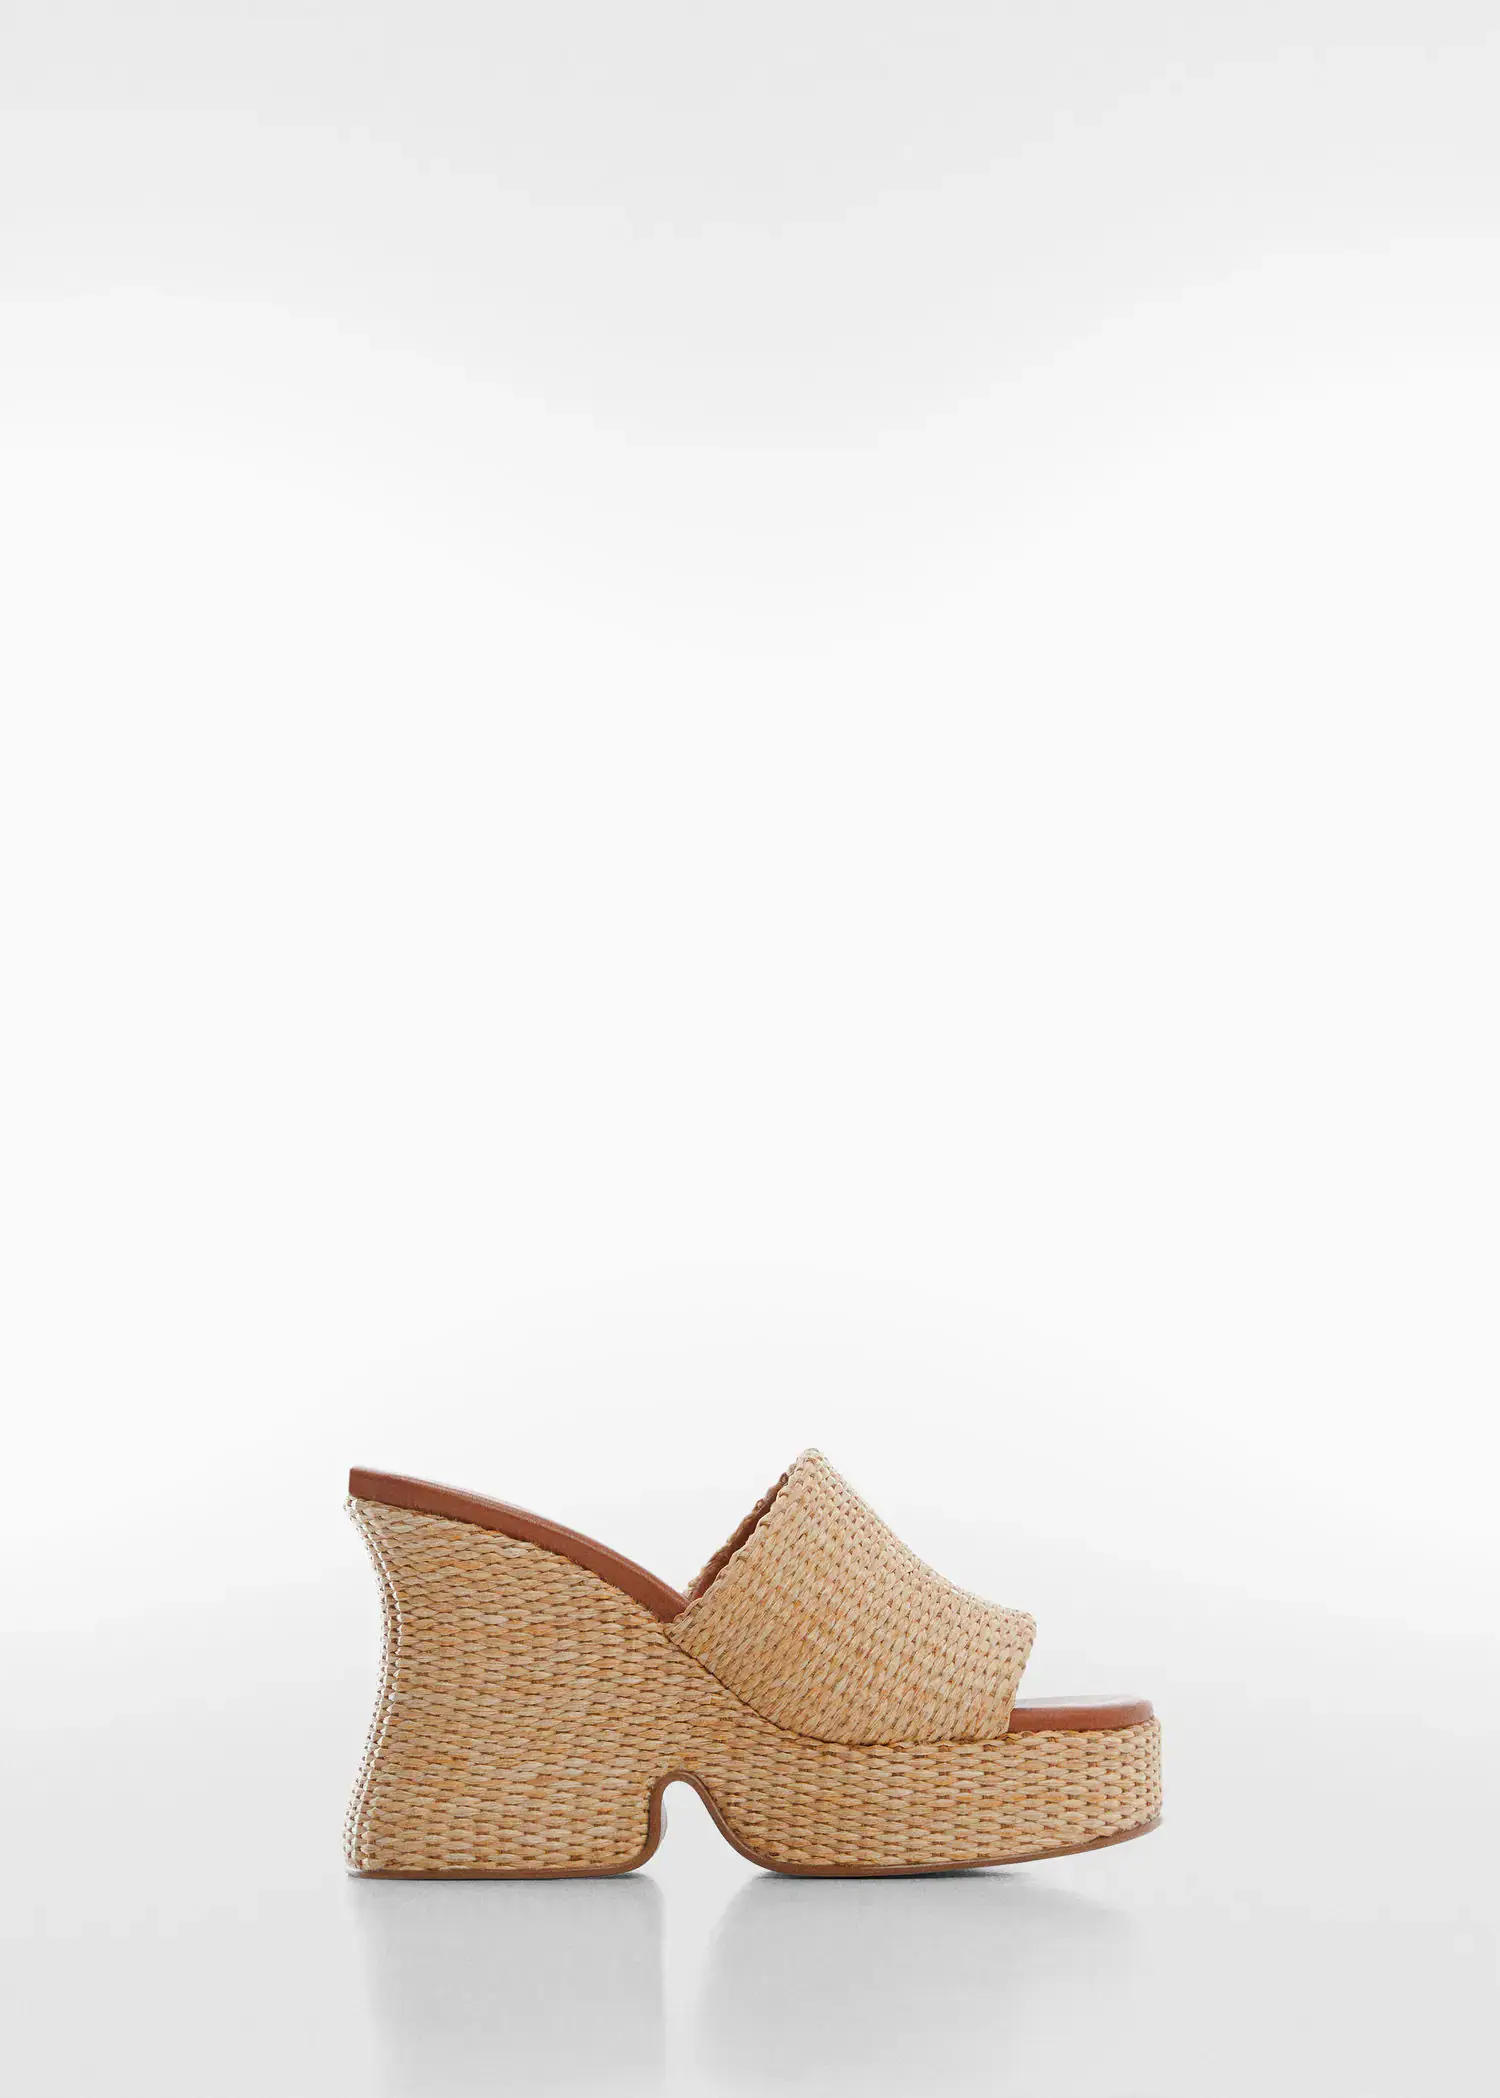 Mango Natural fiber wedge sandals. a pair of shoes that are on the ground. 